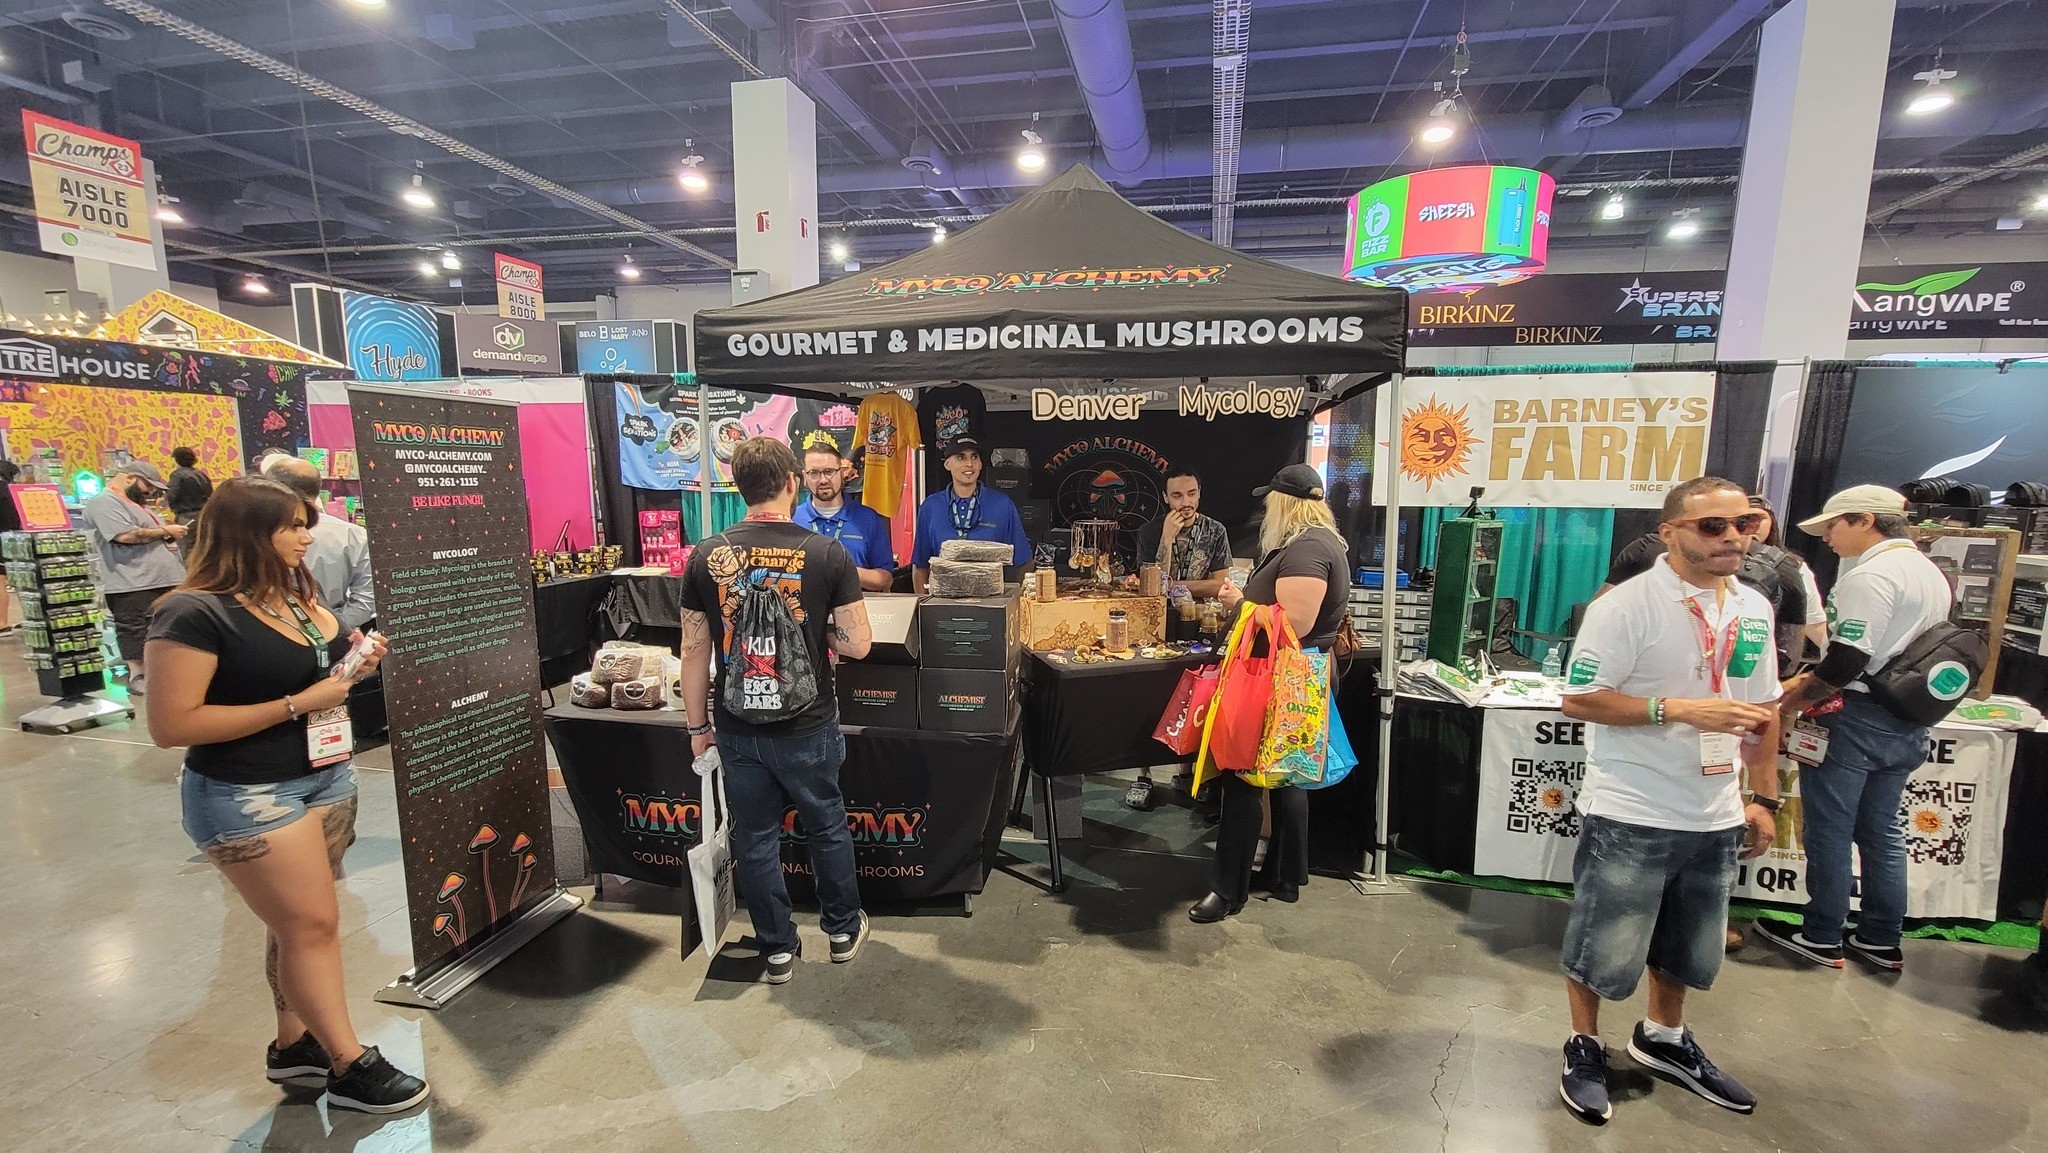 Champs Trade Shows (Feb 2024), Clark County, United States Exhibitions